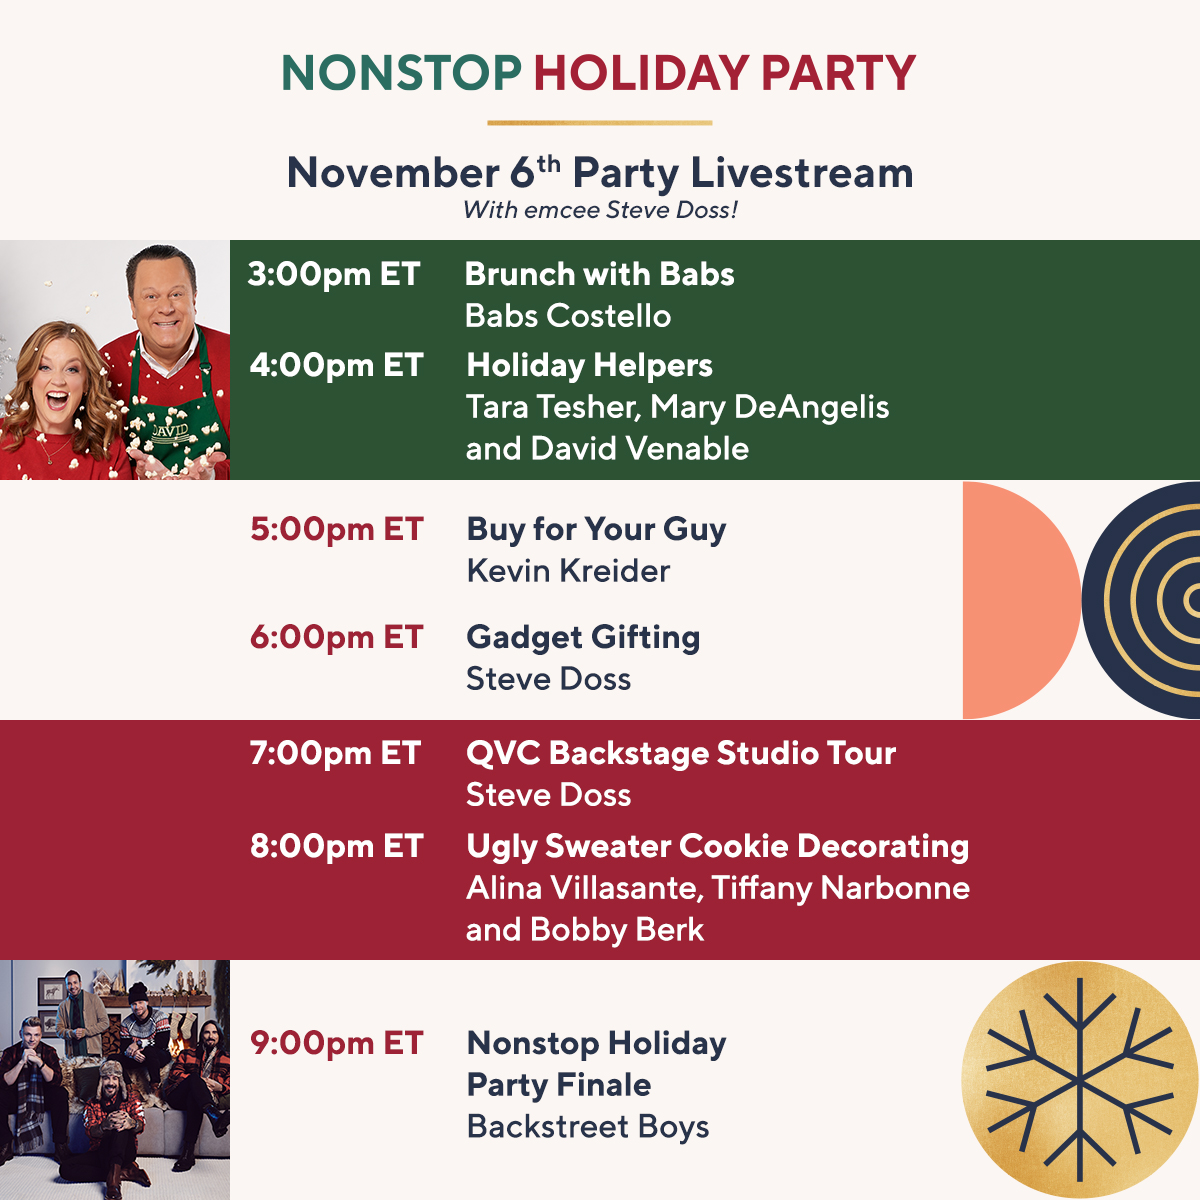 It’s DAY 2 of our #NonStopHolidayParty! 🎉✨🎄 We’re back with tons more fun, celebs, deals & surprises! Don’t miss a minute of the fun, so check out our lineup for today below & more info on how you can watch our exclusive party stream! > qvc.co/nshpday2q